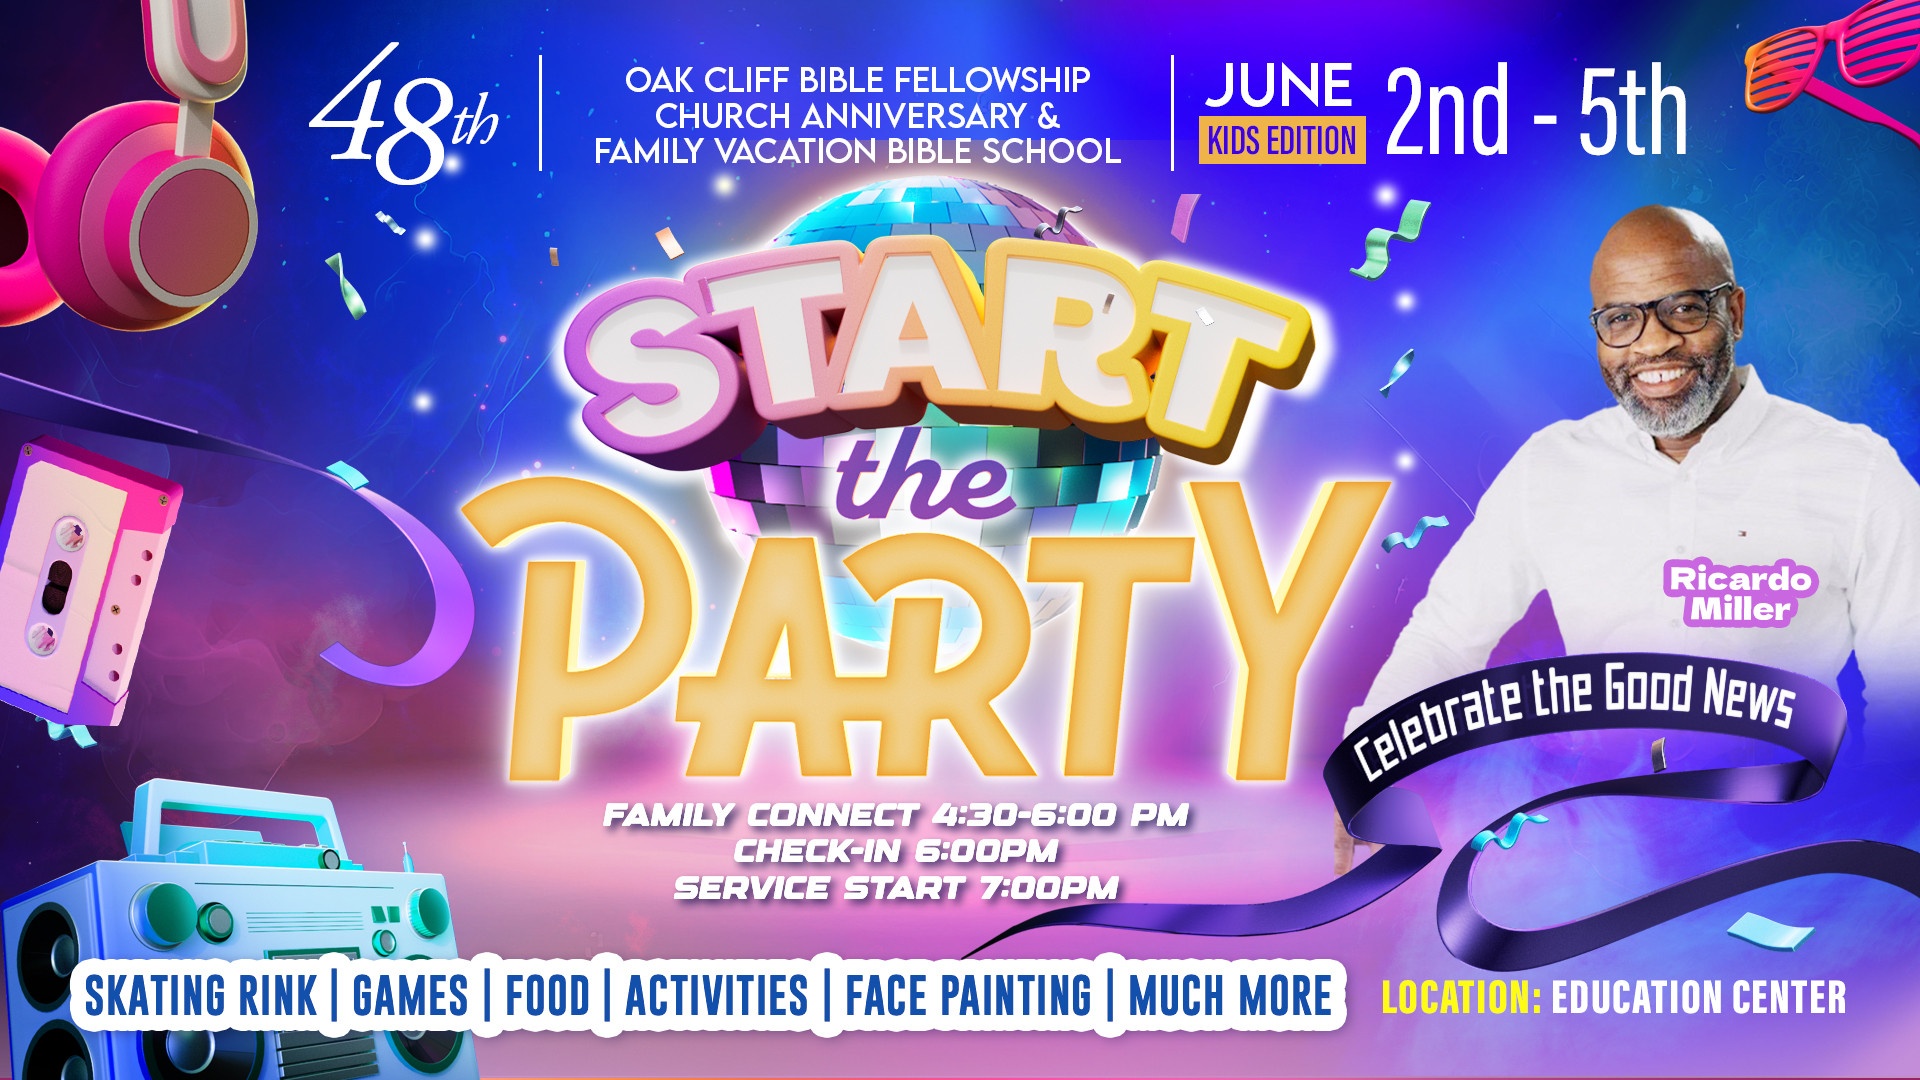 Family vacation Bible school (VBS) for kids with Ricardo Miller